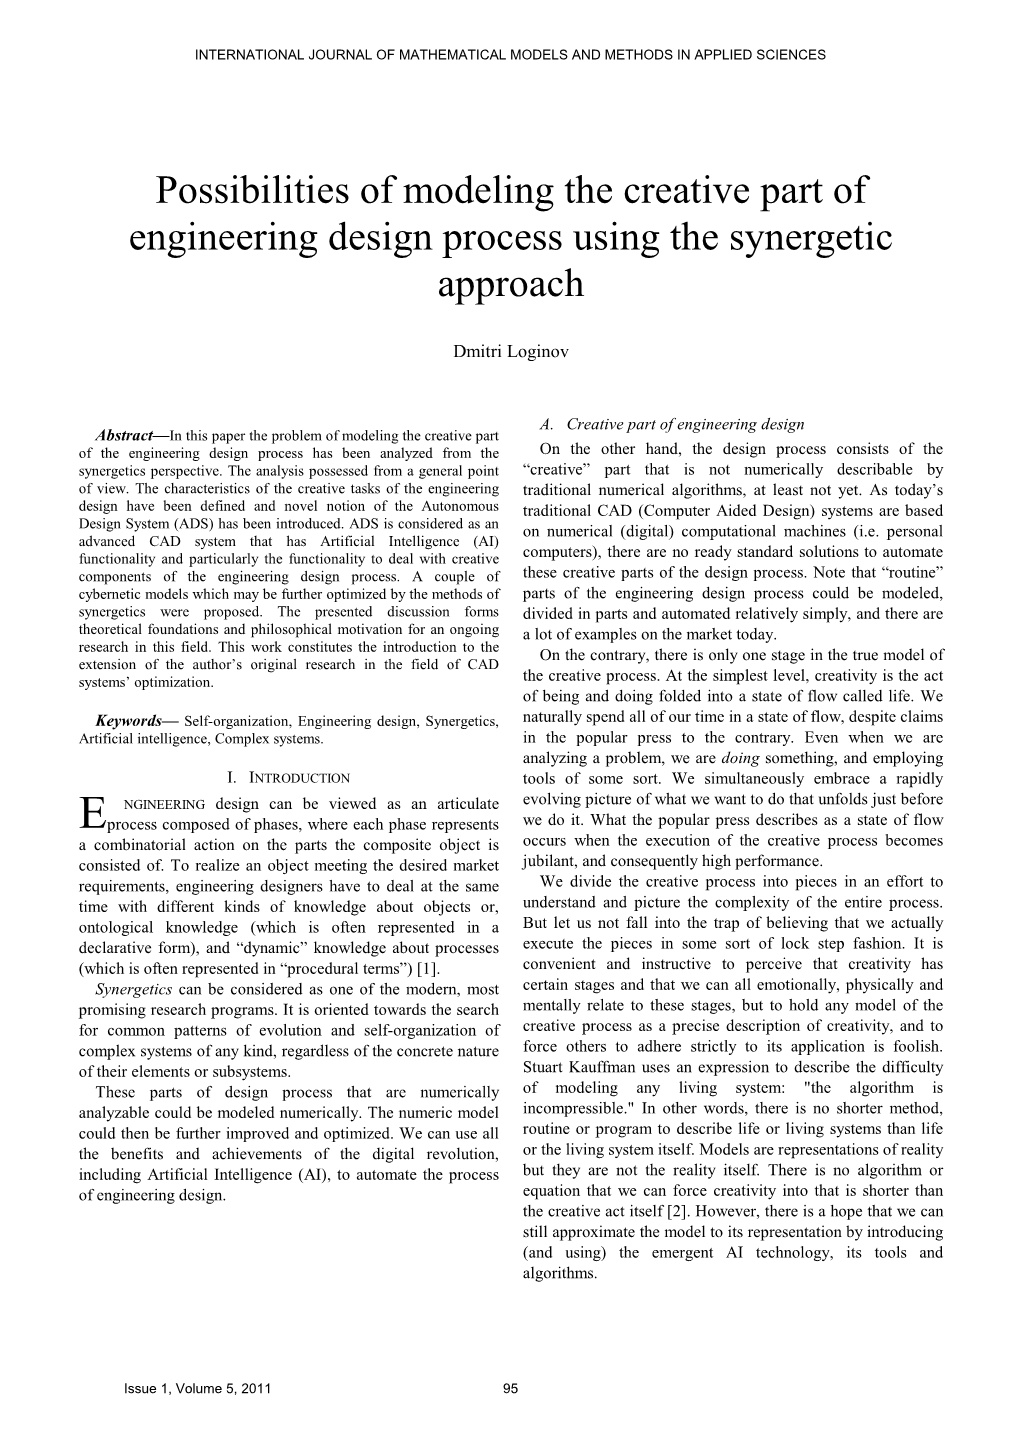 Possibilities of Modeling the Creative Part of Engineering Design Process Using the Synergetic Approach